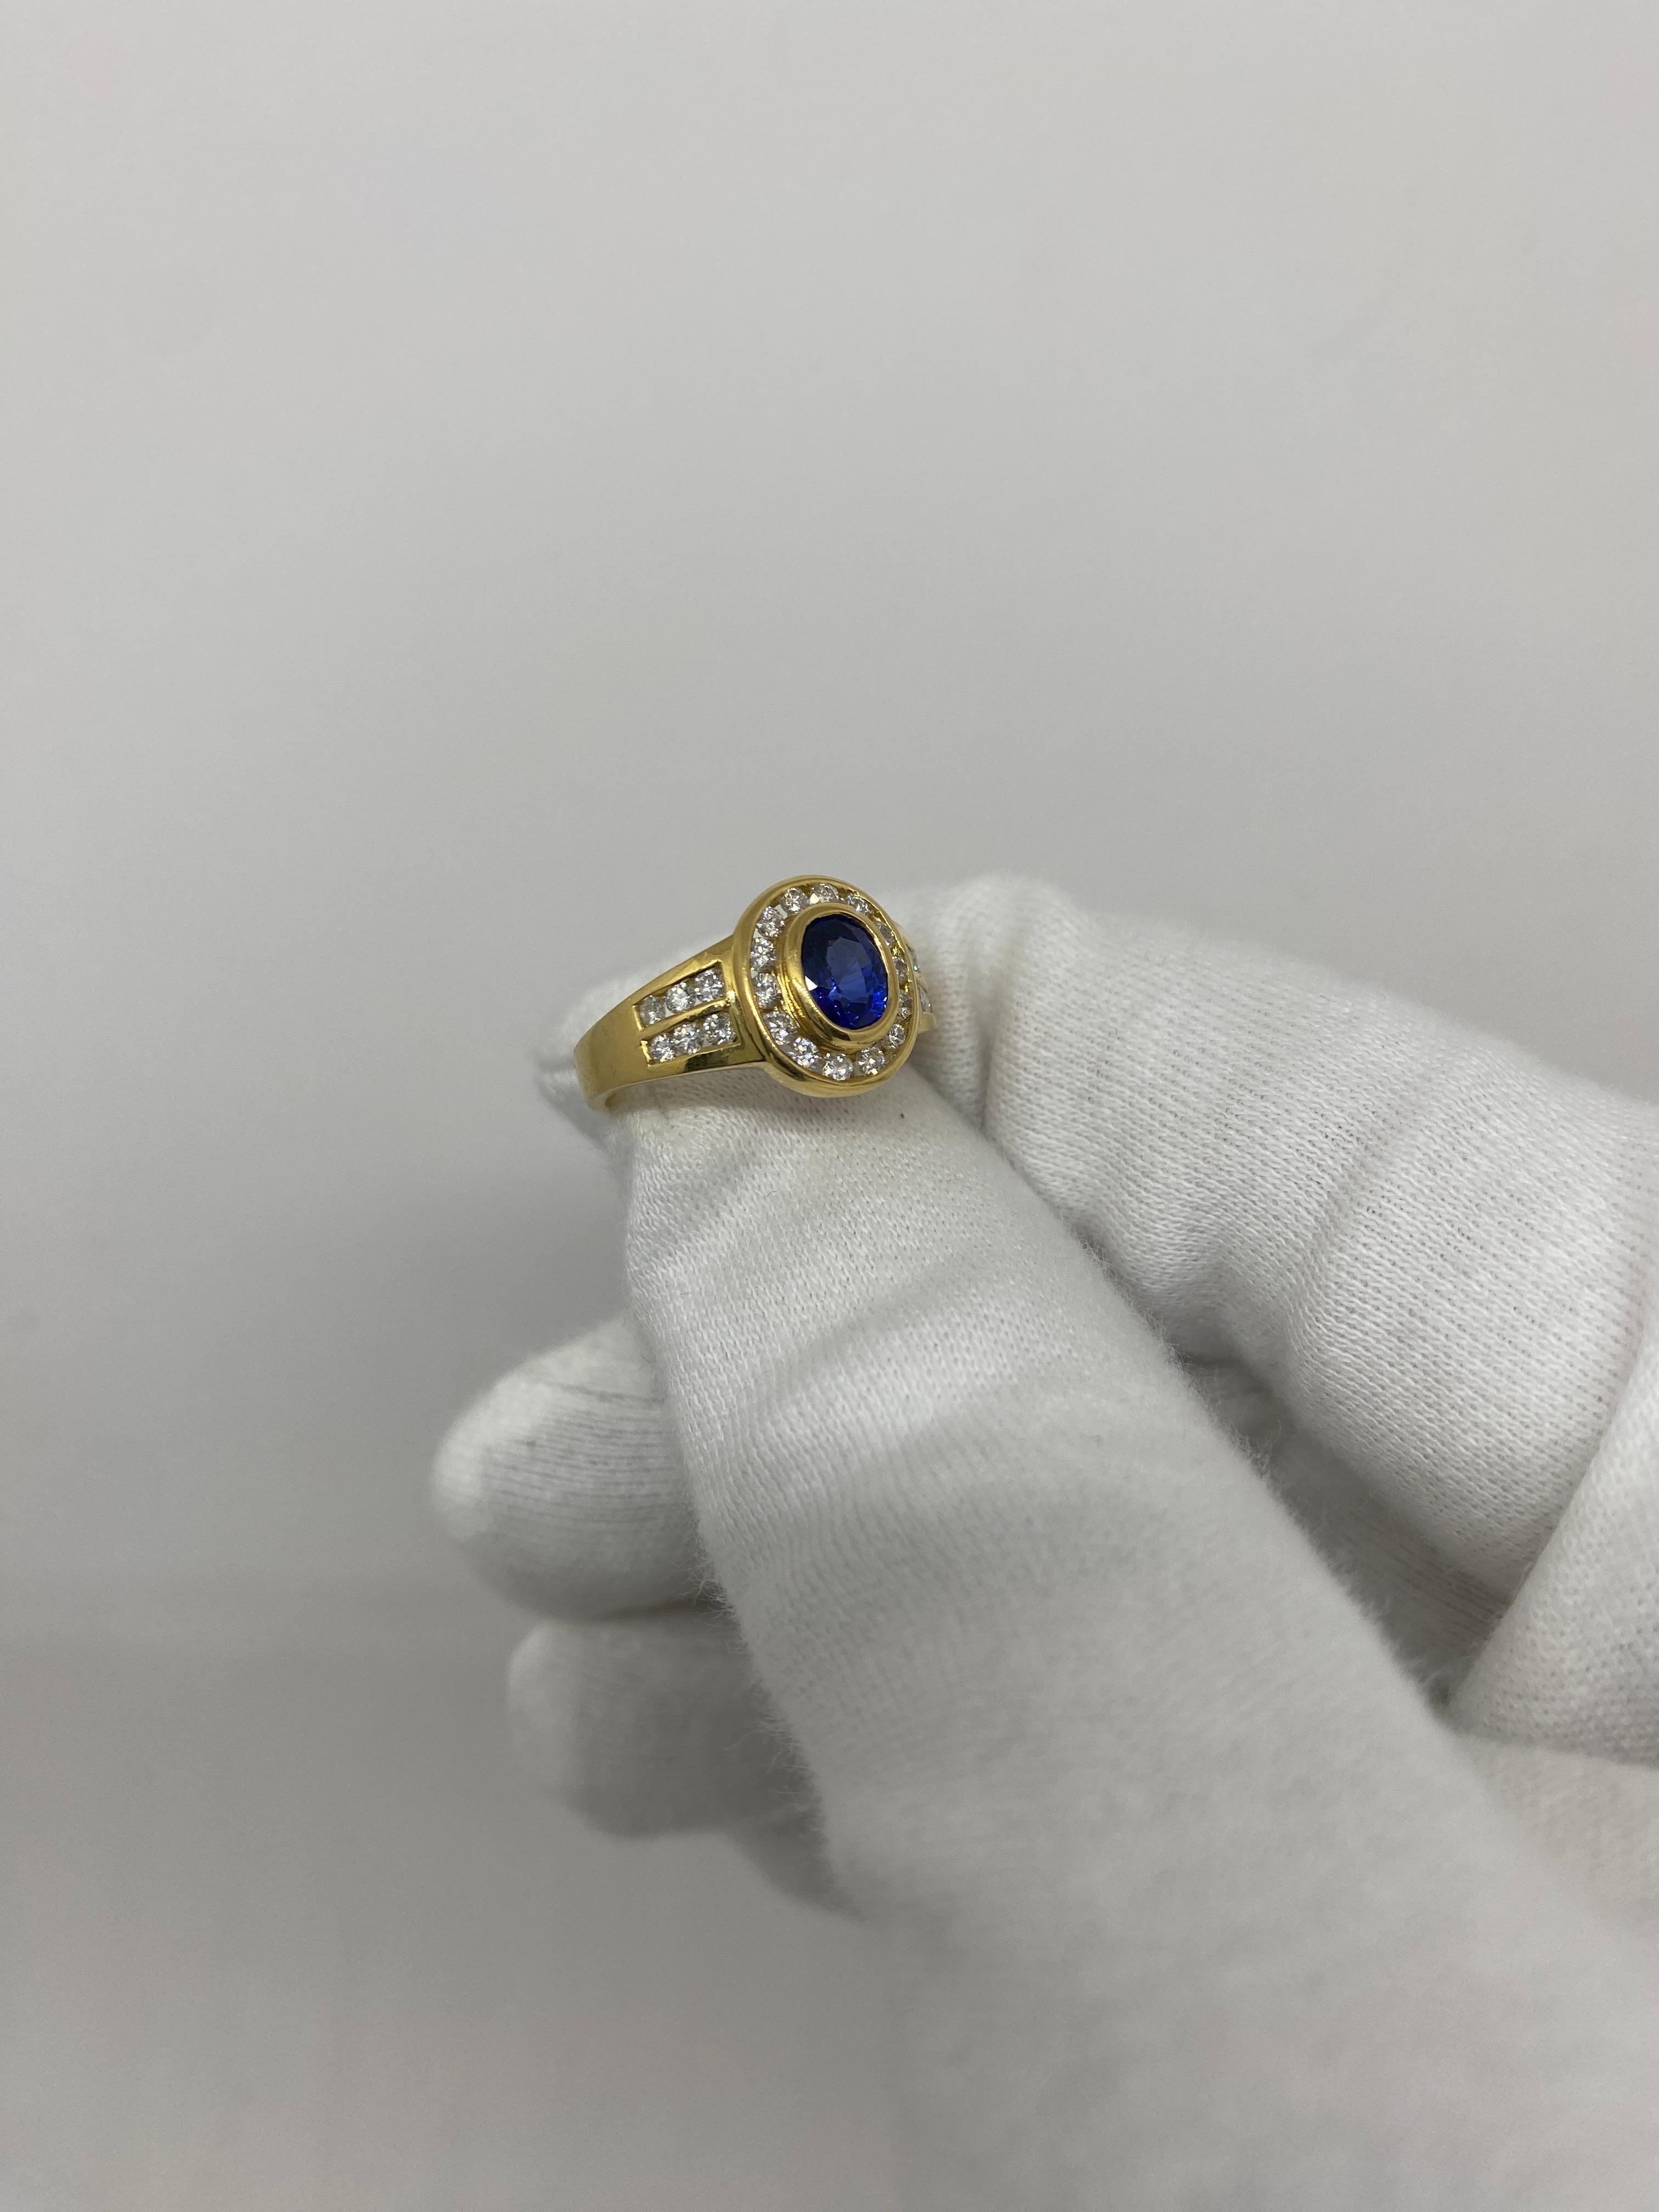 18 Karat Yellow Gold Vintage Ring 0.90 Ct Oval Sapphire & 0.51 Ct White Diamonds For Sale 1